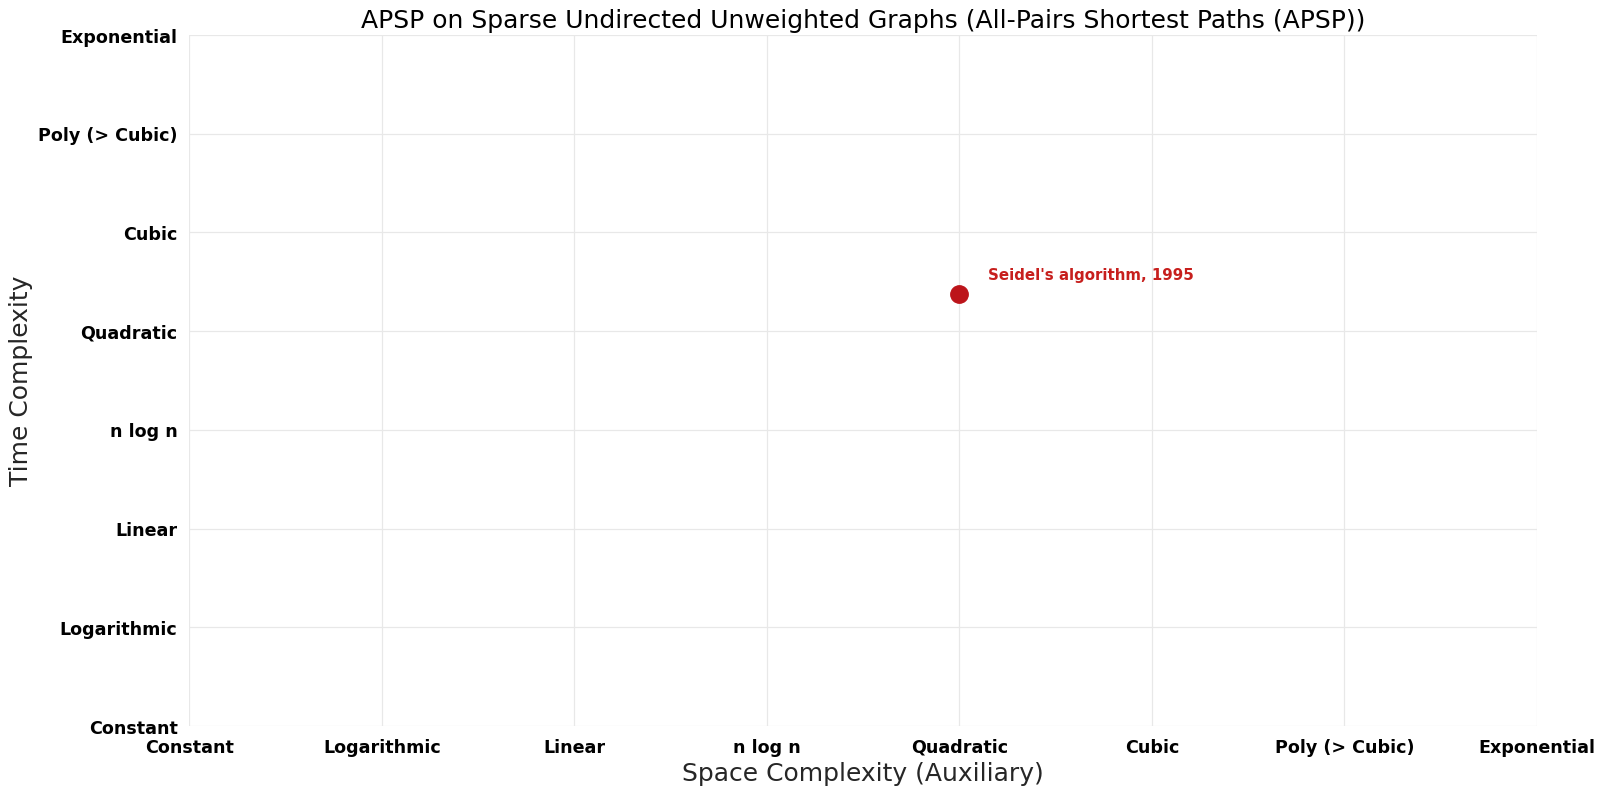 All-Pairs Shortest Paths (APSP) - APSP on Sparse Undirected Unweighted Graphs - Pareto Frontier.png